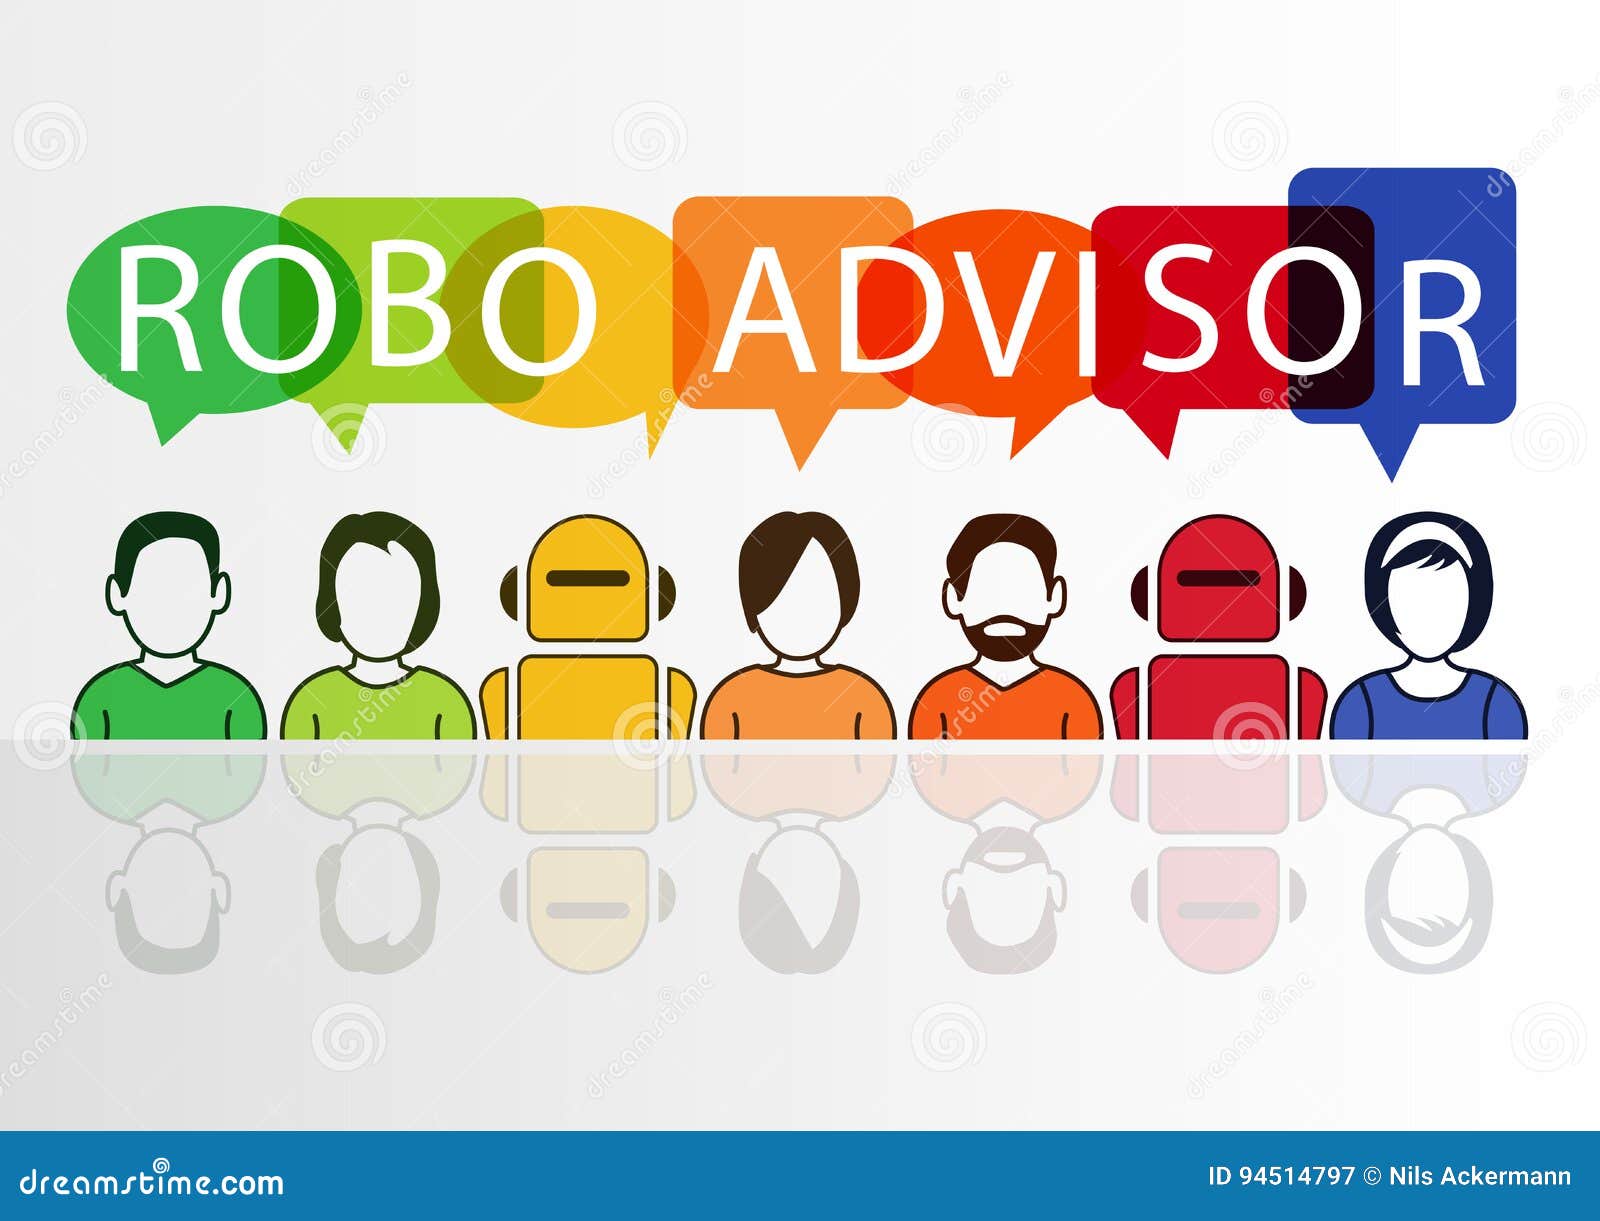 robo-advisor concept as  with colorful icons of robots and persons